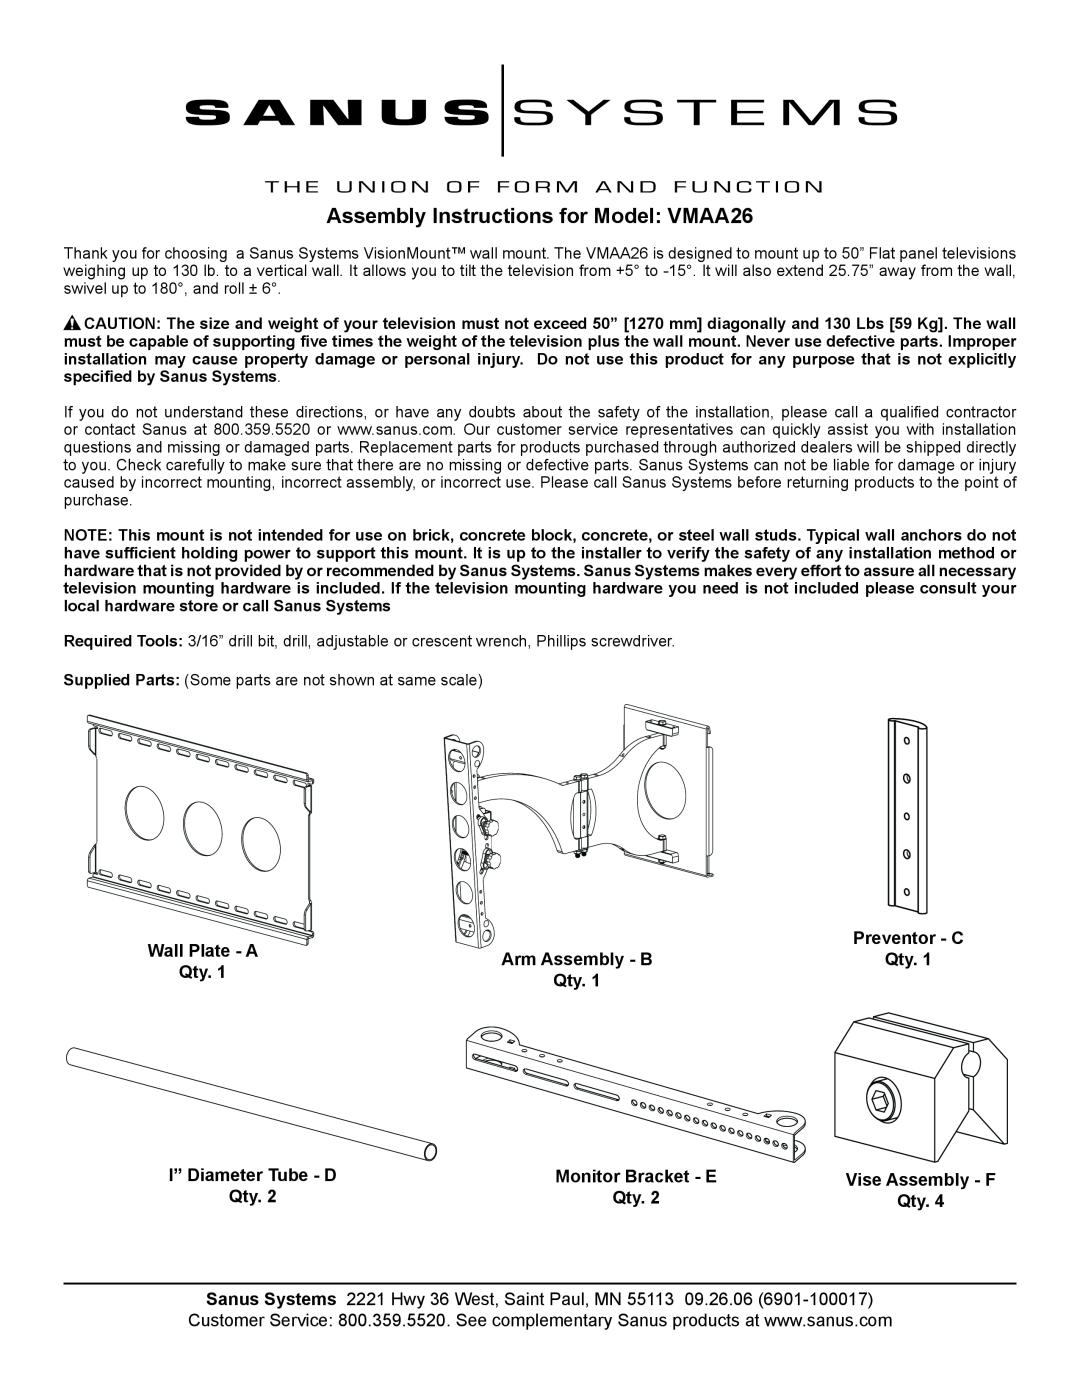 Sanus Systems manual Assembly Instructions for Model VMAA26 